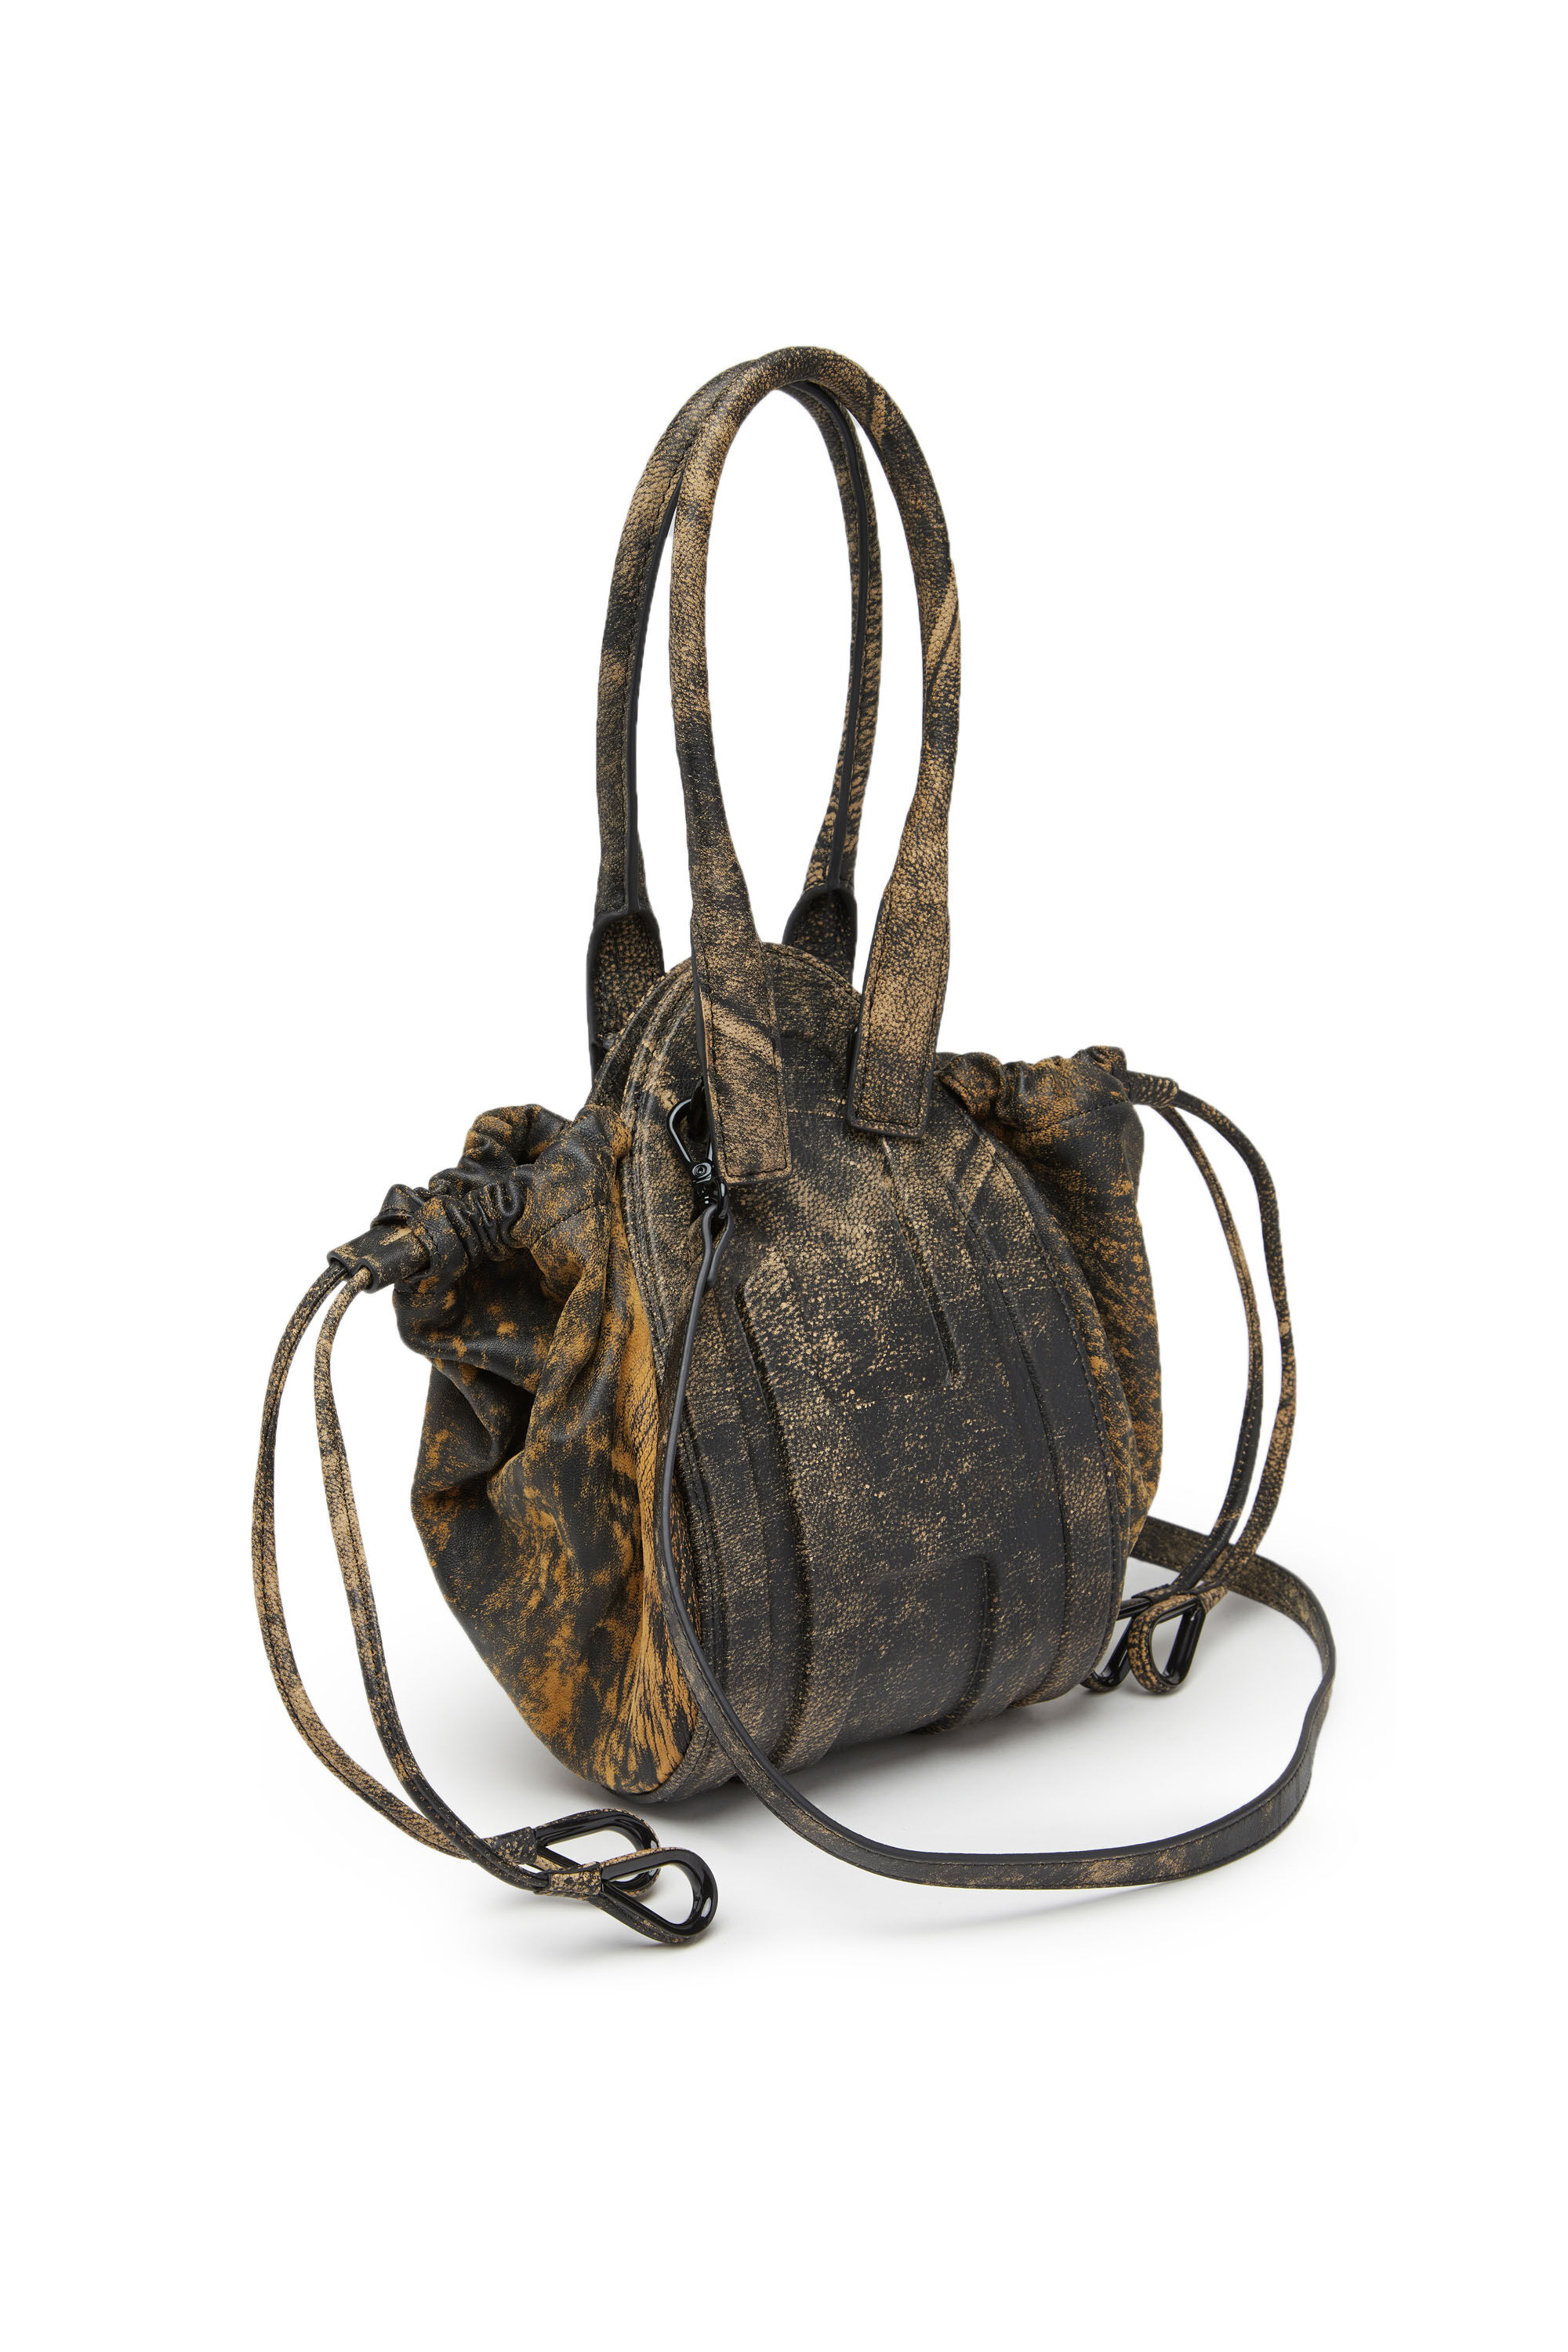 Diesel - 1DR-FOLD XS, Woman 1DR-Fold XS - Oval logo handbag in marbled leather in Brown - Image 2